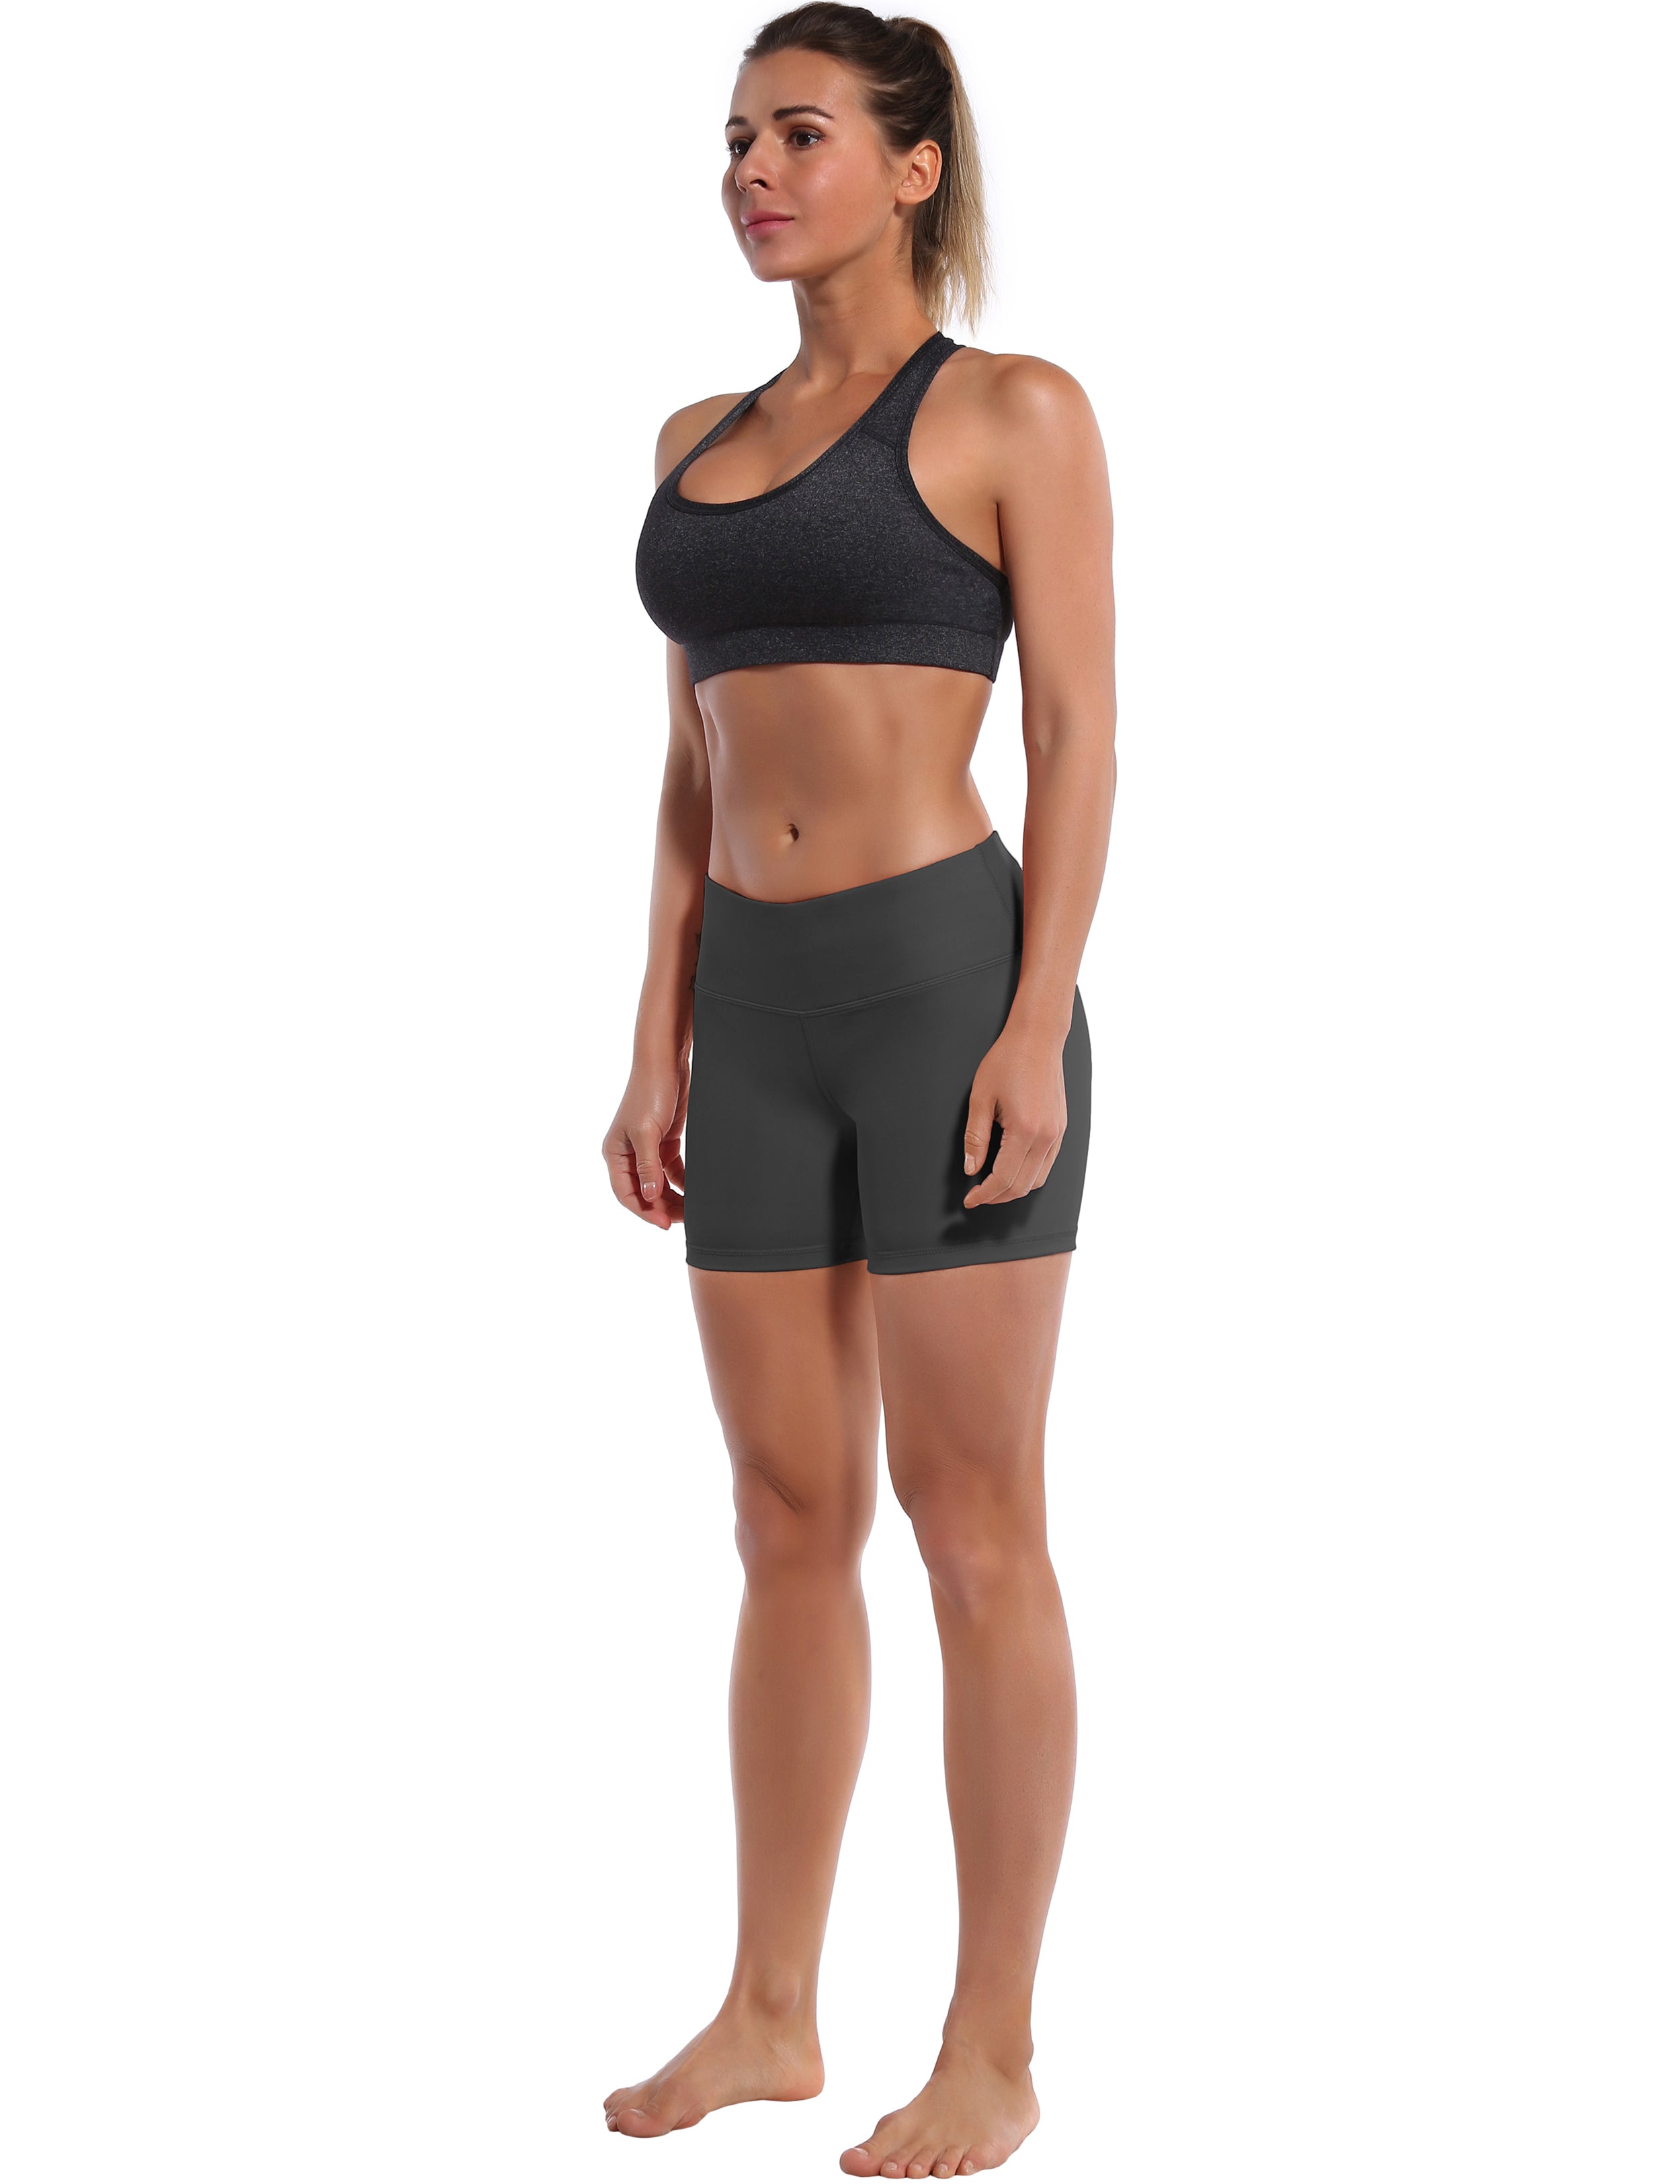 4" Jogging Shorts shadowcharcoal Sleek, soft, smooth and totally comfortable: our newest style is here. Softest-ever fabric High elasticity High density 4-way stretch Fabric doesn't attract lint easily No see-through Moisture-wicking Machine wash 75% Nylon, 25% Spandex